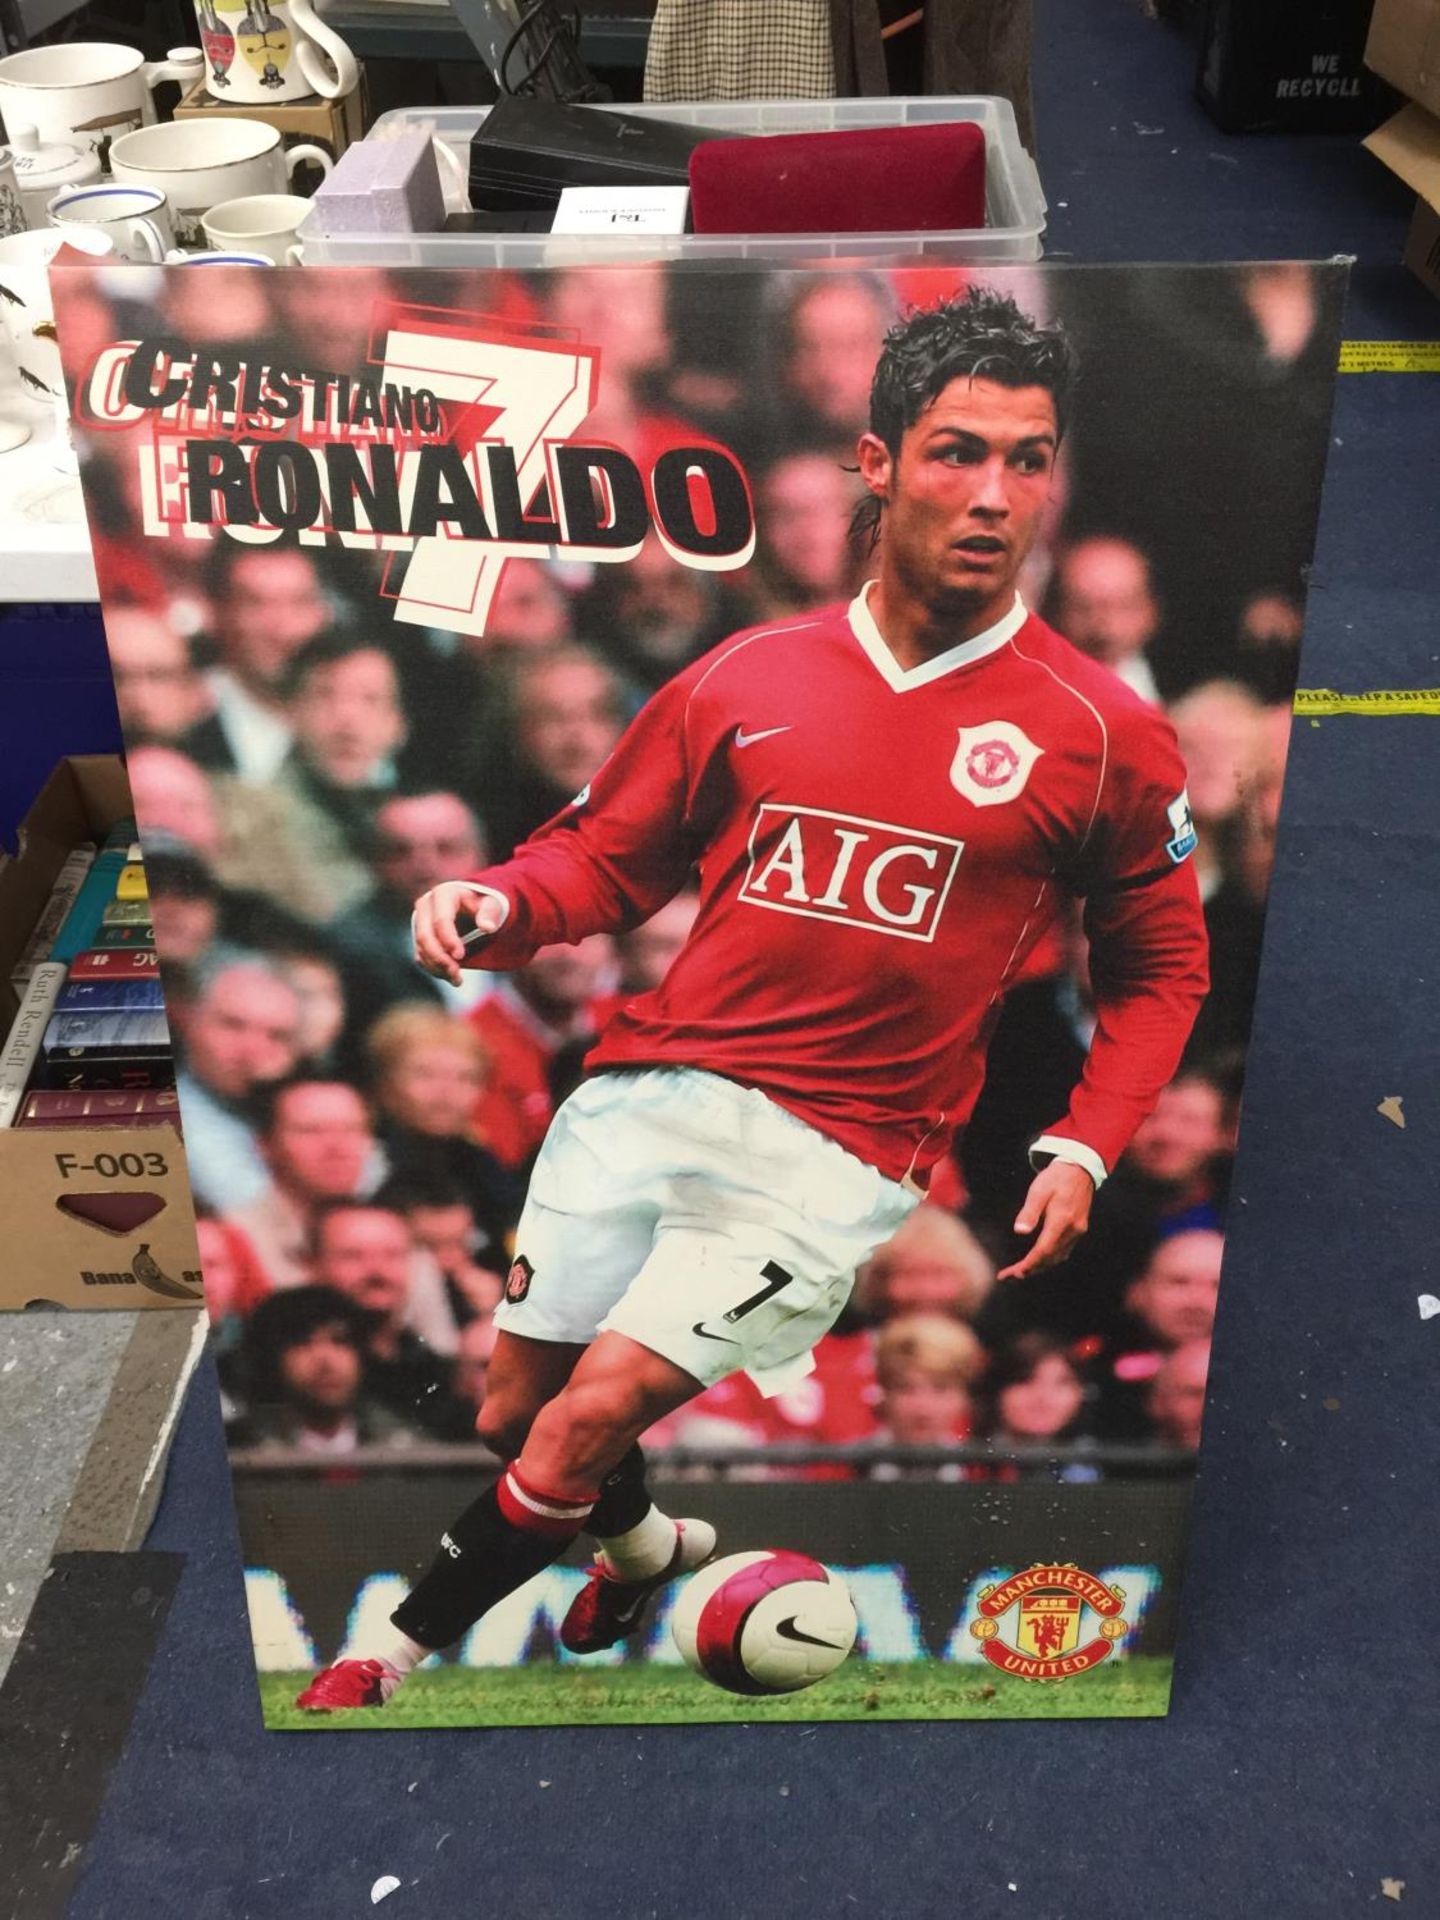 A LARGE WALL CANVAS OF CRISTIANO RONALDO PLAYING FOR MANCHESTER UNITED H: 92 CM